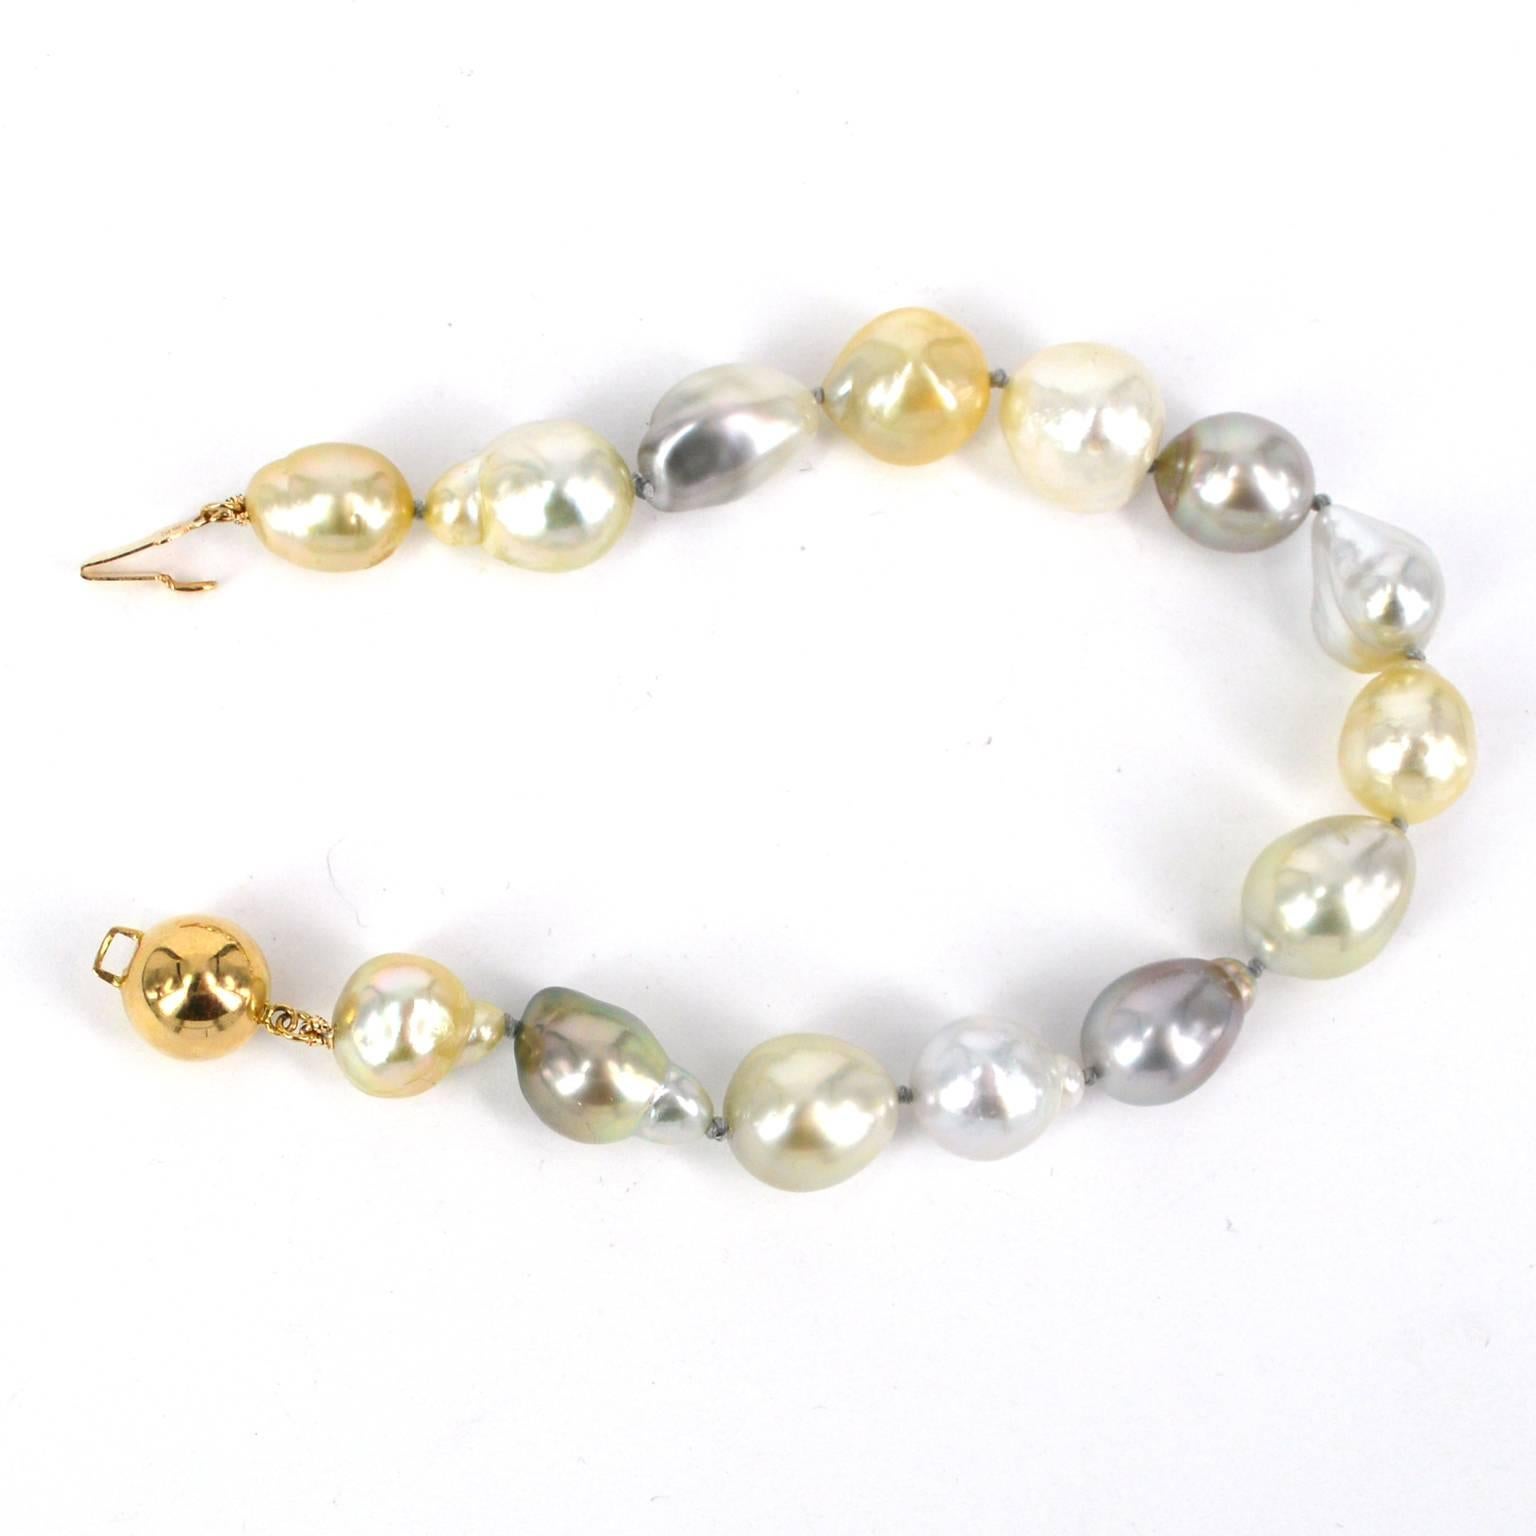 Hand knotted on soft grey thread these South Sea and Tahitian Pearls have a gorgeous soft glow of silver grey and gold tones. Baroque pearls range from 10mm to 14mm with a 10mm vermeil clasp.

All Pearls are natural and as such may include natural